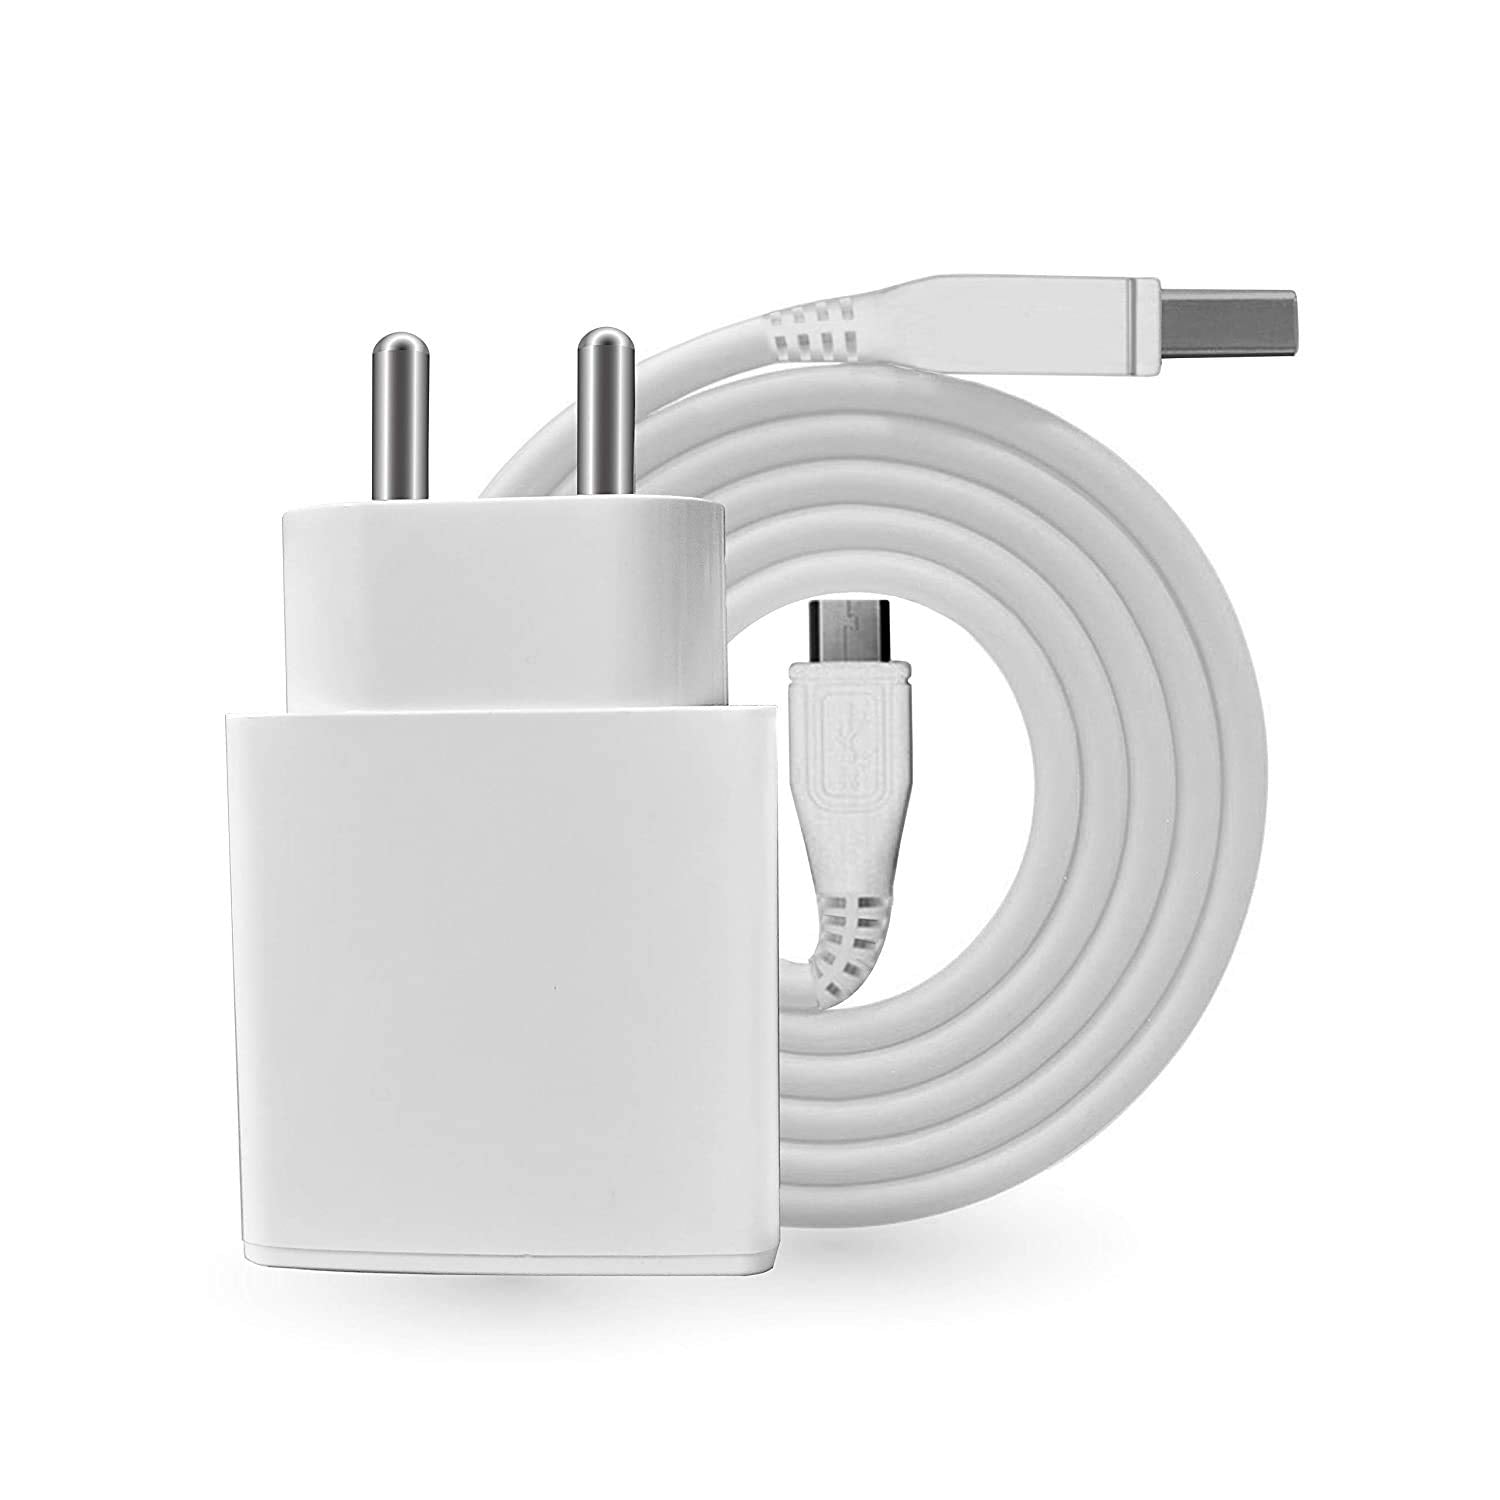 VIVO Y27L 2 Amp Fast Mobile Charger with Cable